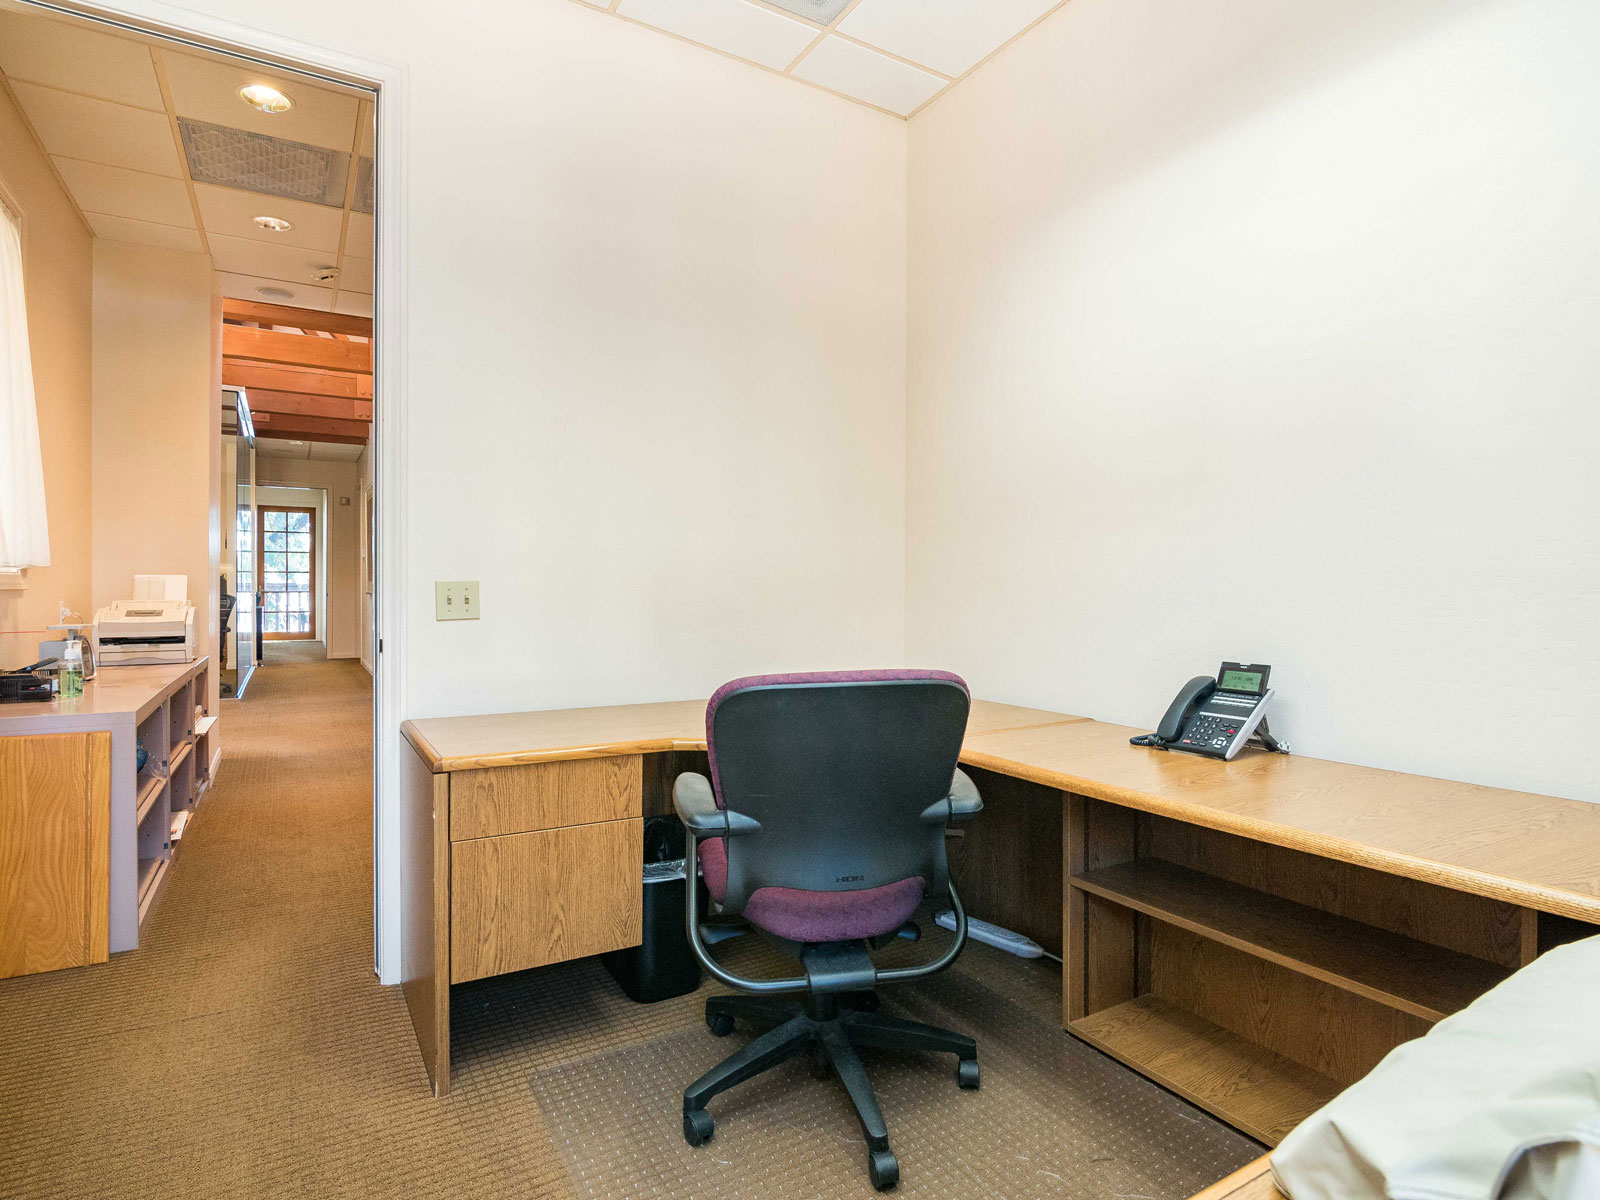 316-s-melrose-vista-ca-executive-offices-for-lease-209